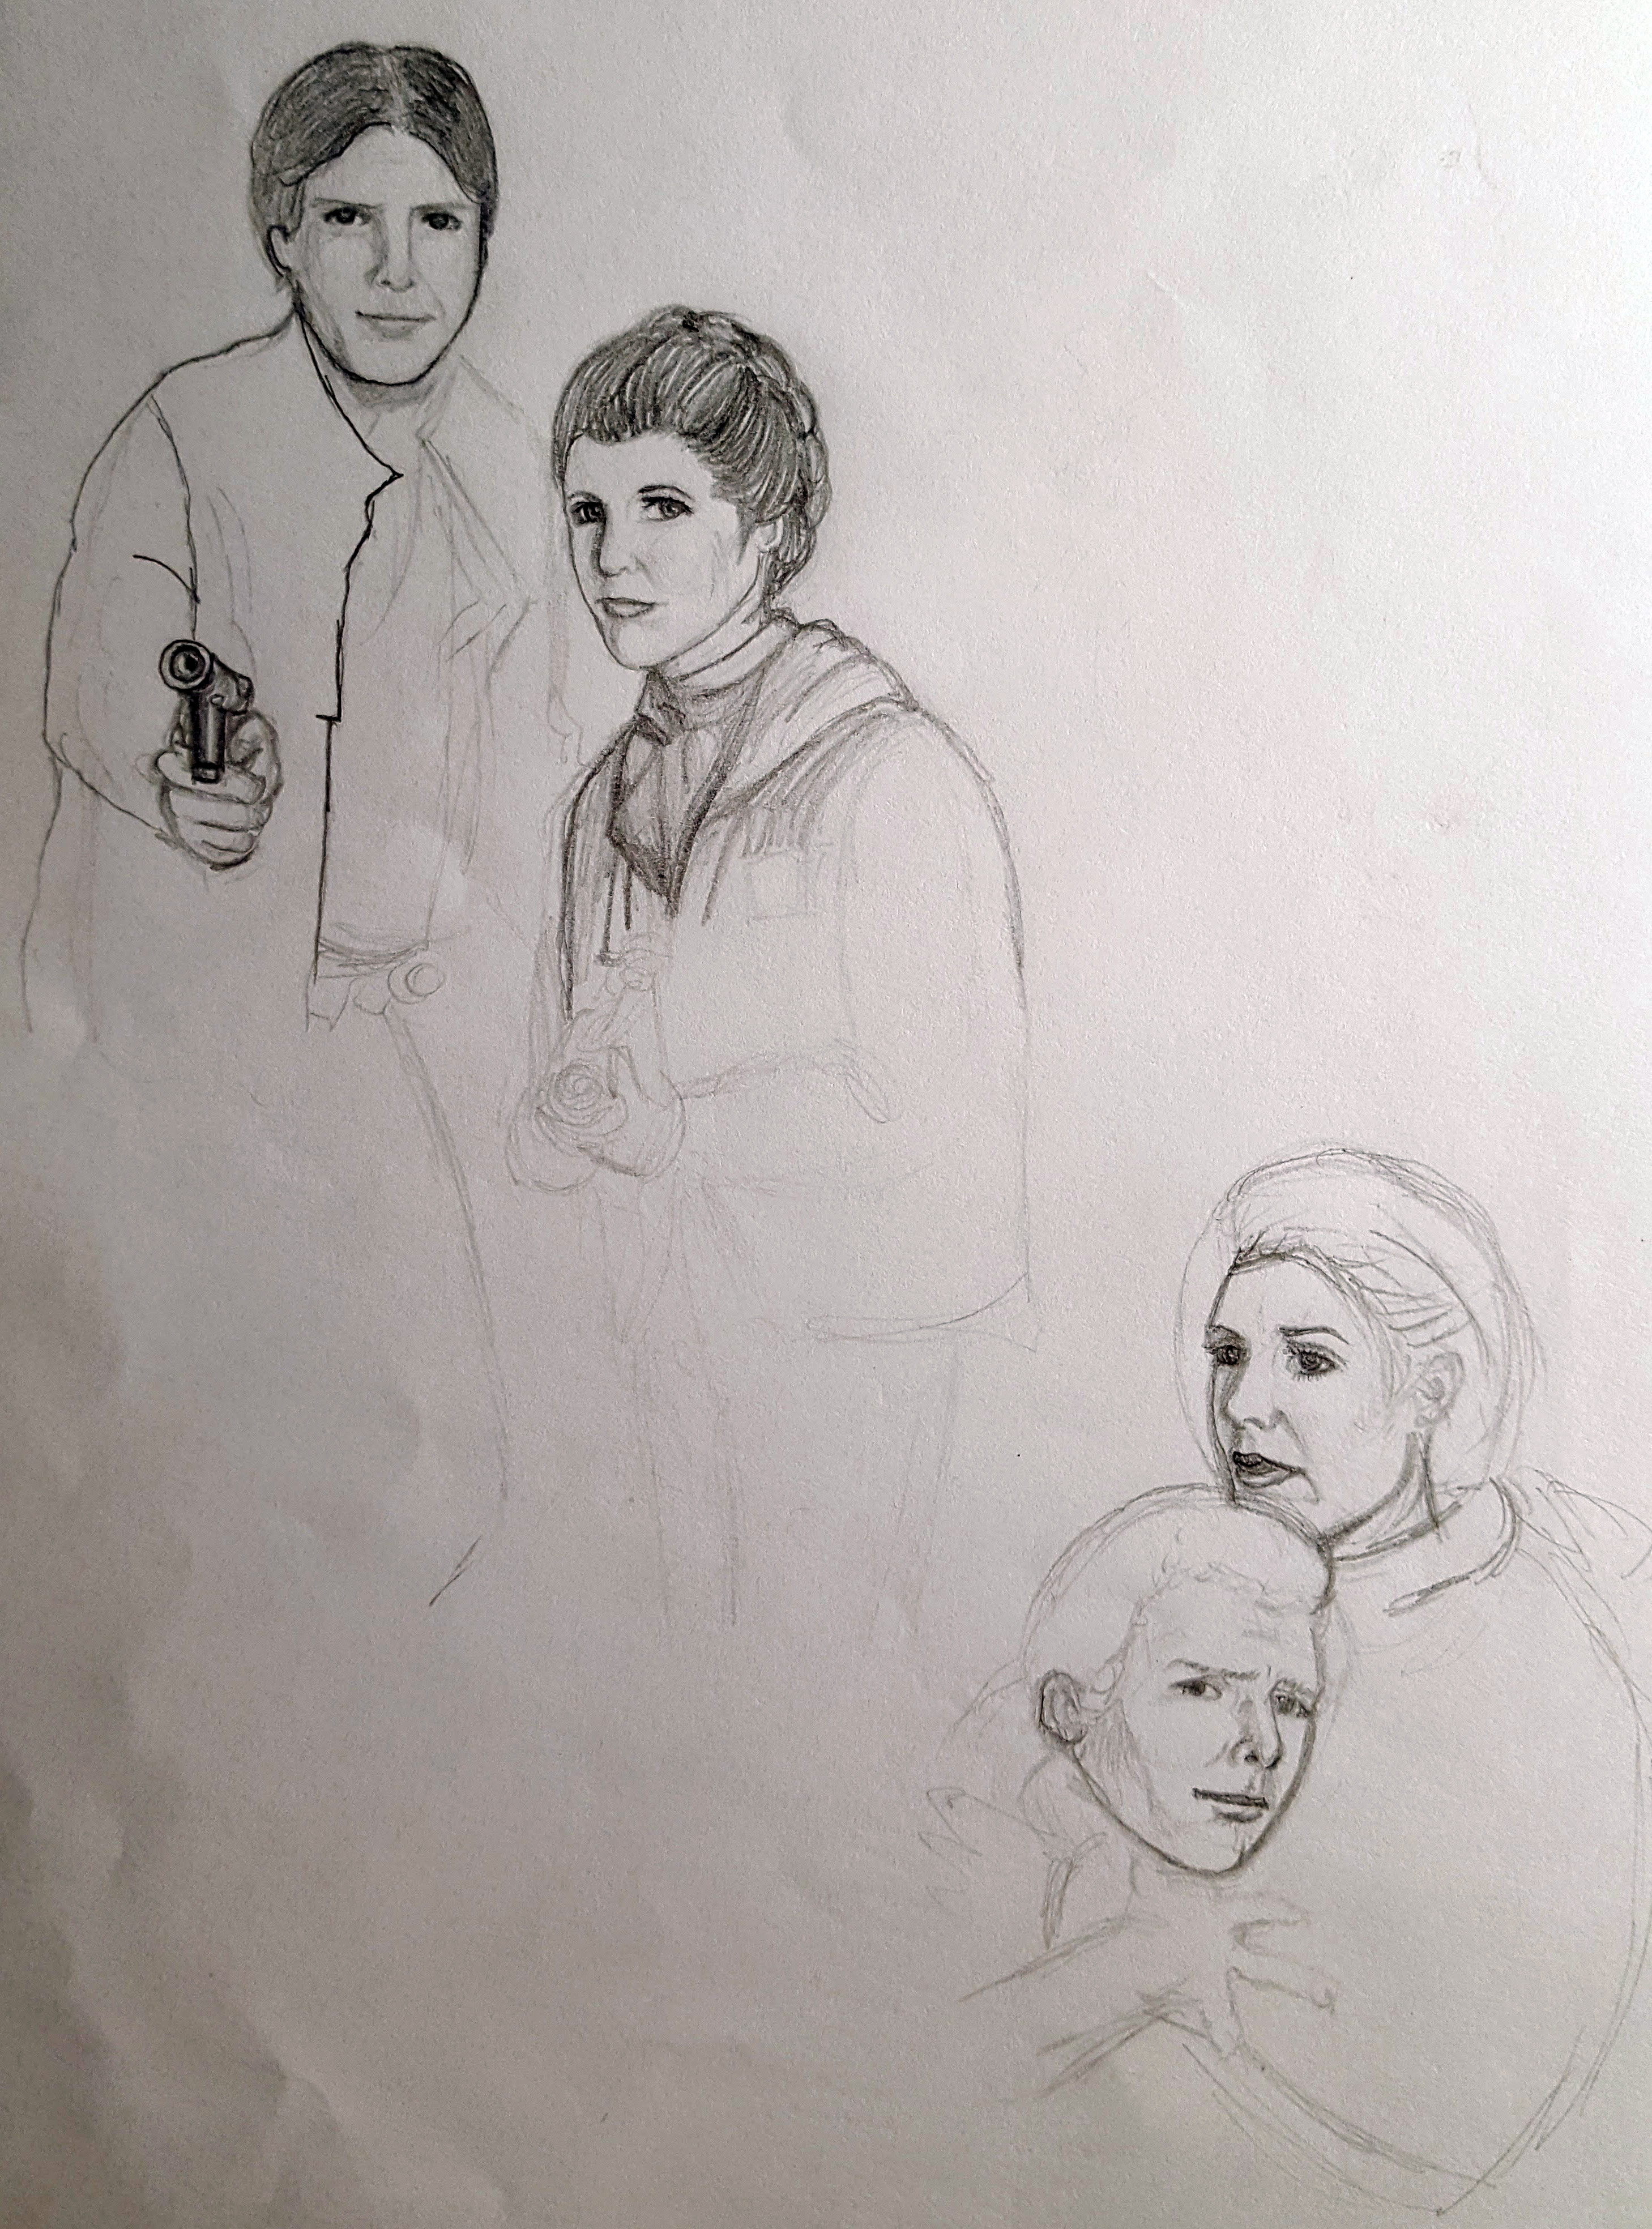 This was going to be a collection of Han/Leia scenes/poses, but I guess I left it unfinished.